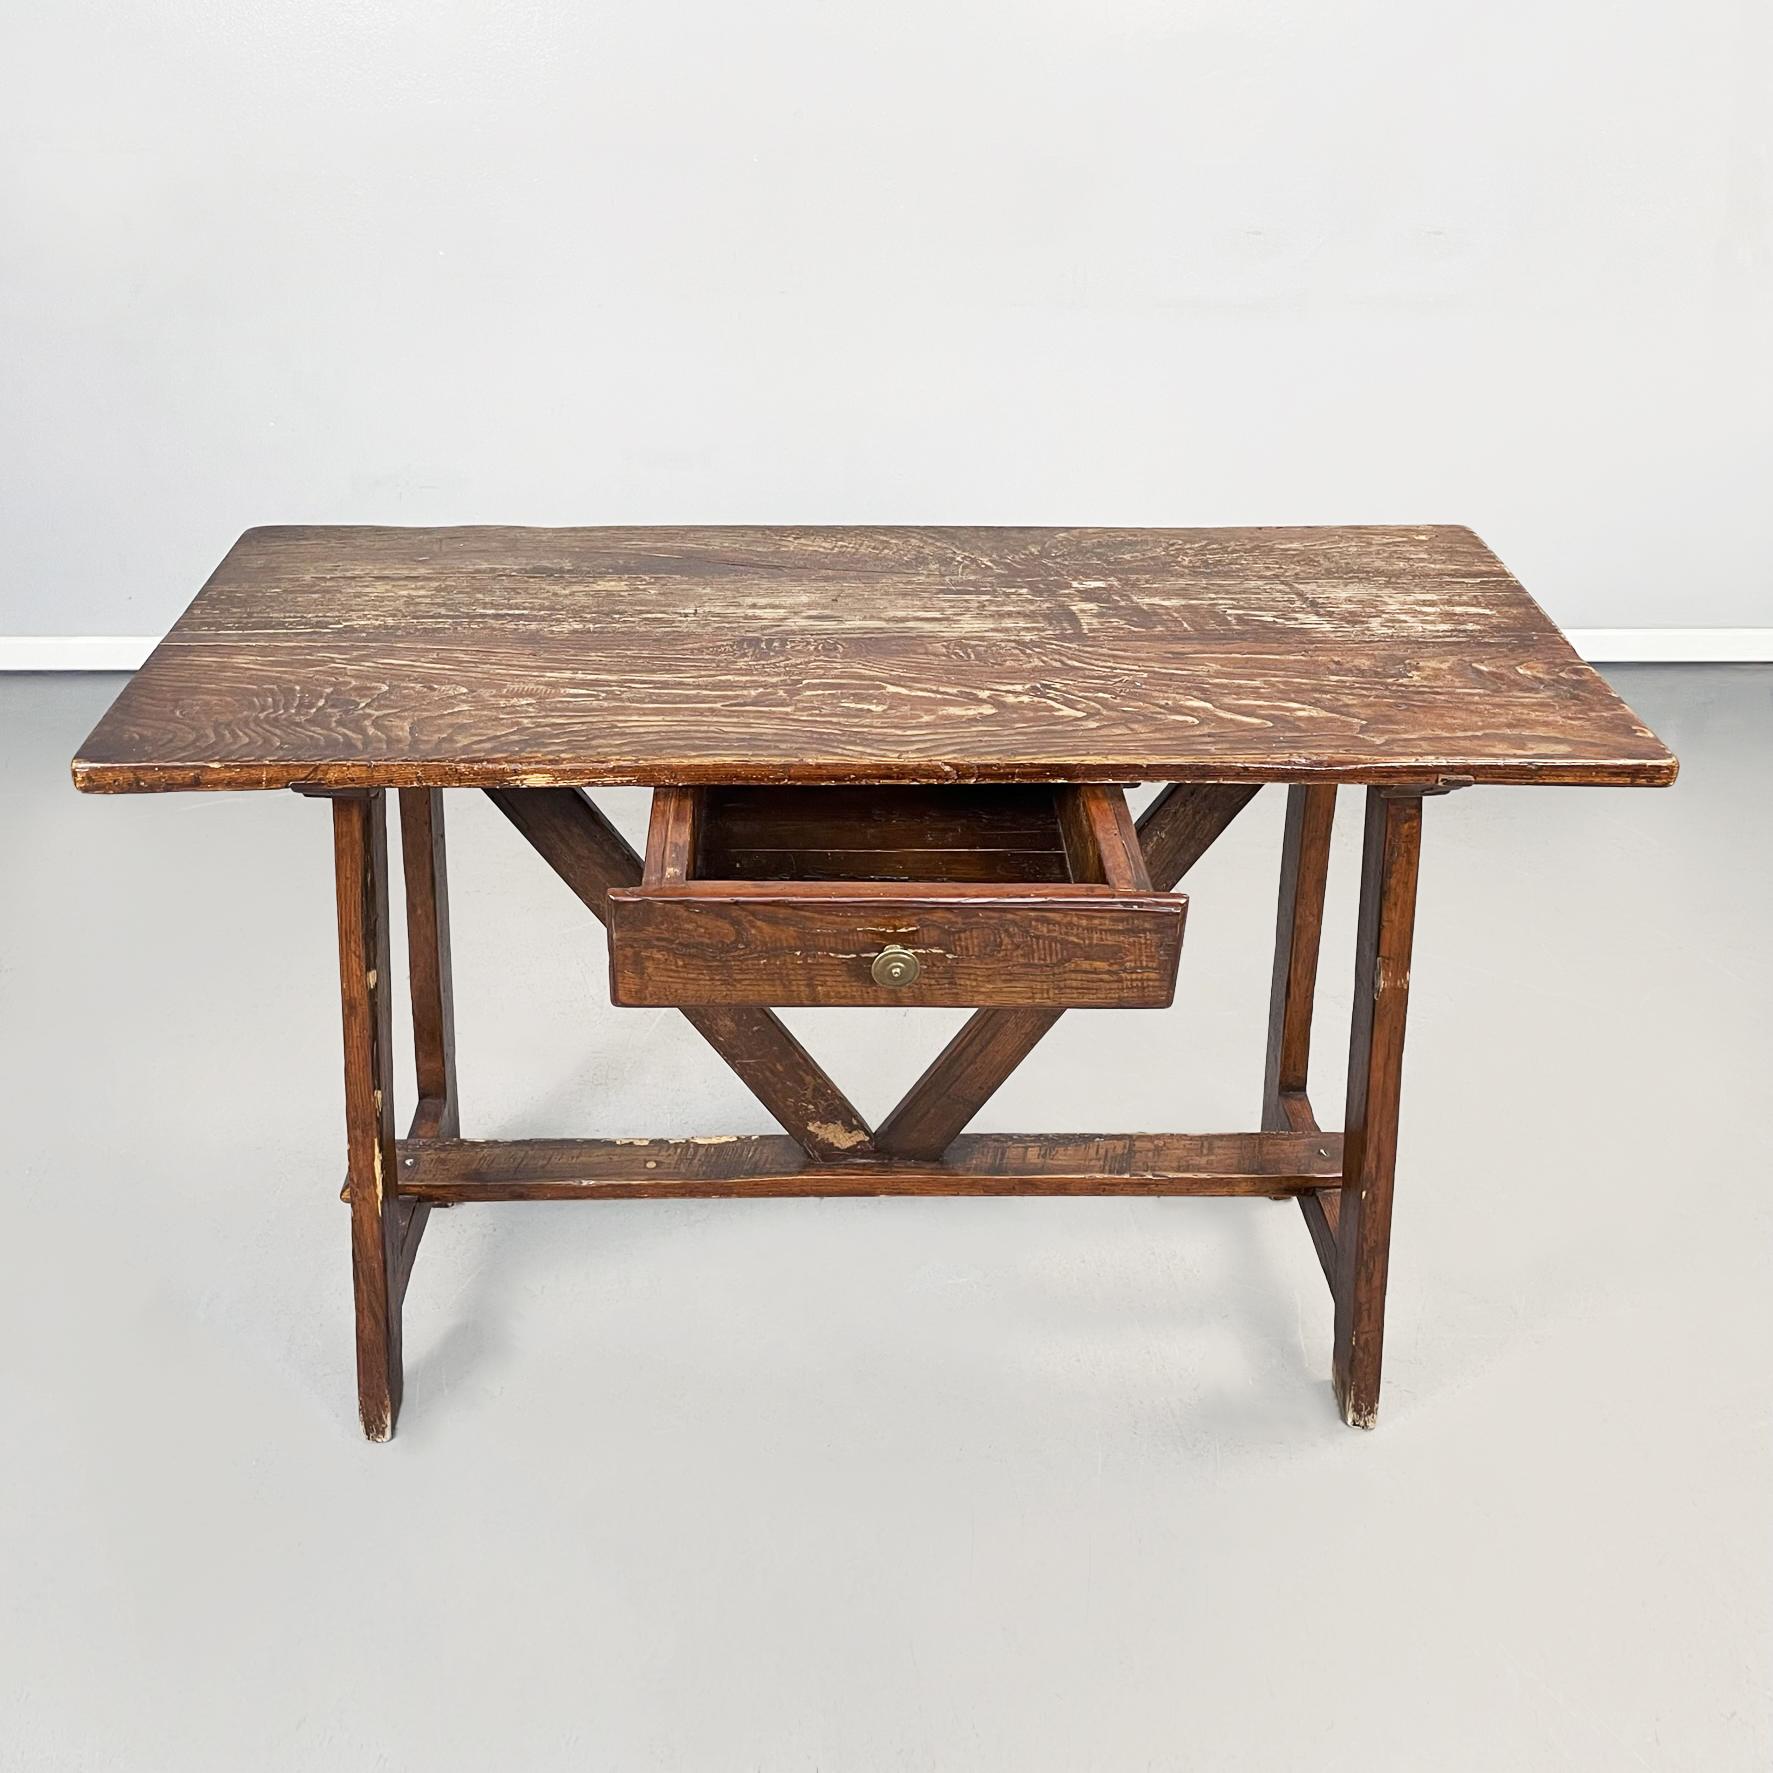 Italian Antique Wooden Table Fratino with a Drawer, 1900s For Sale 2